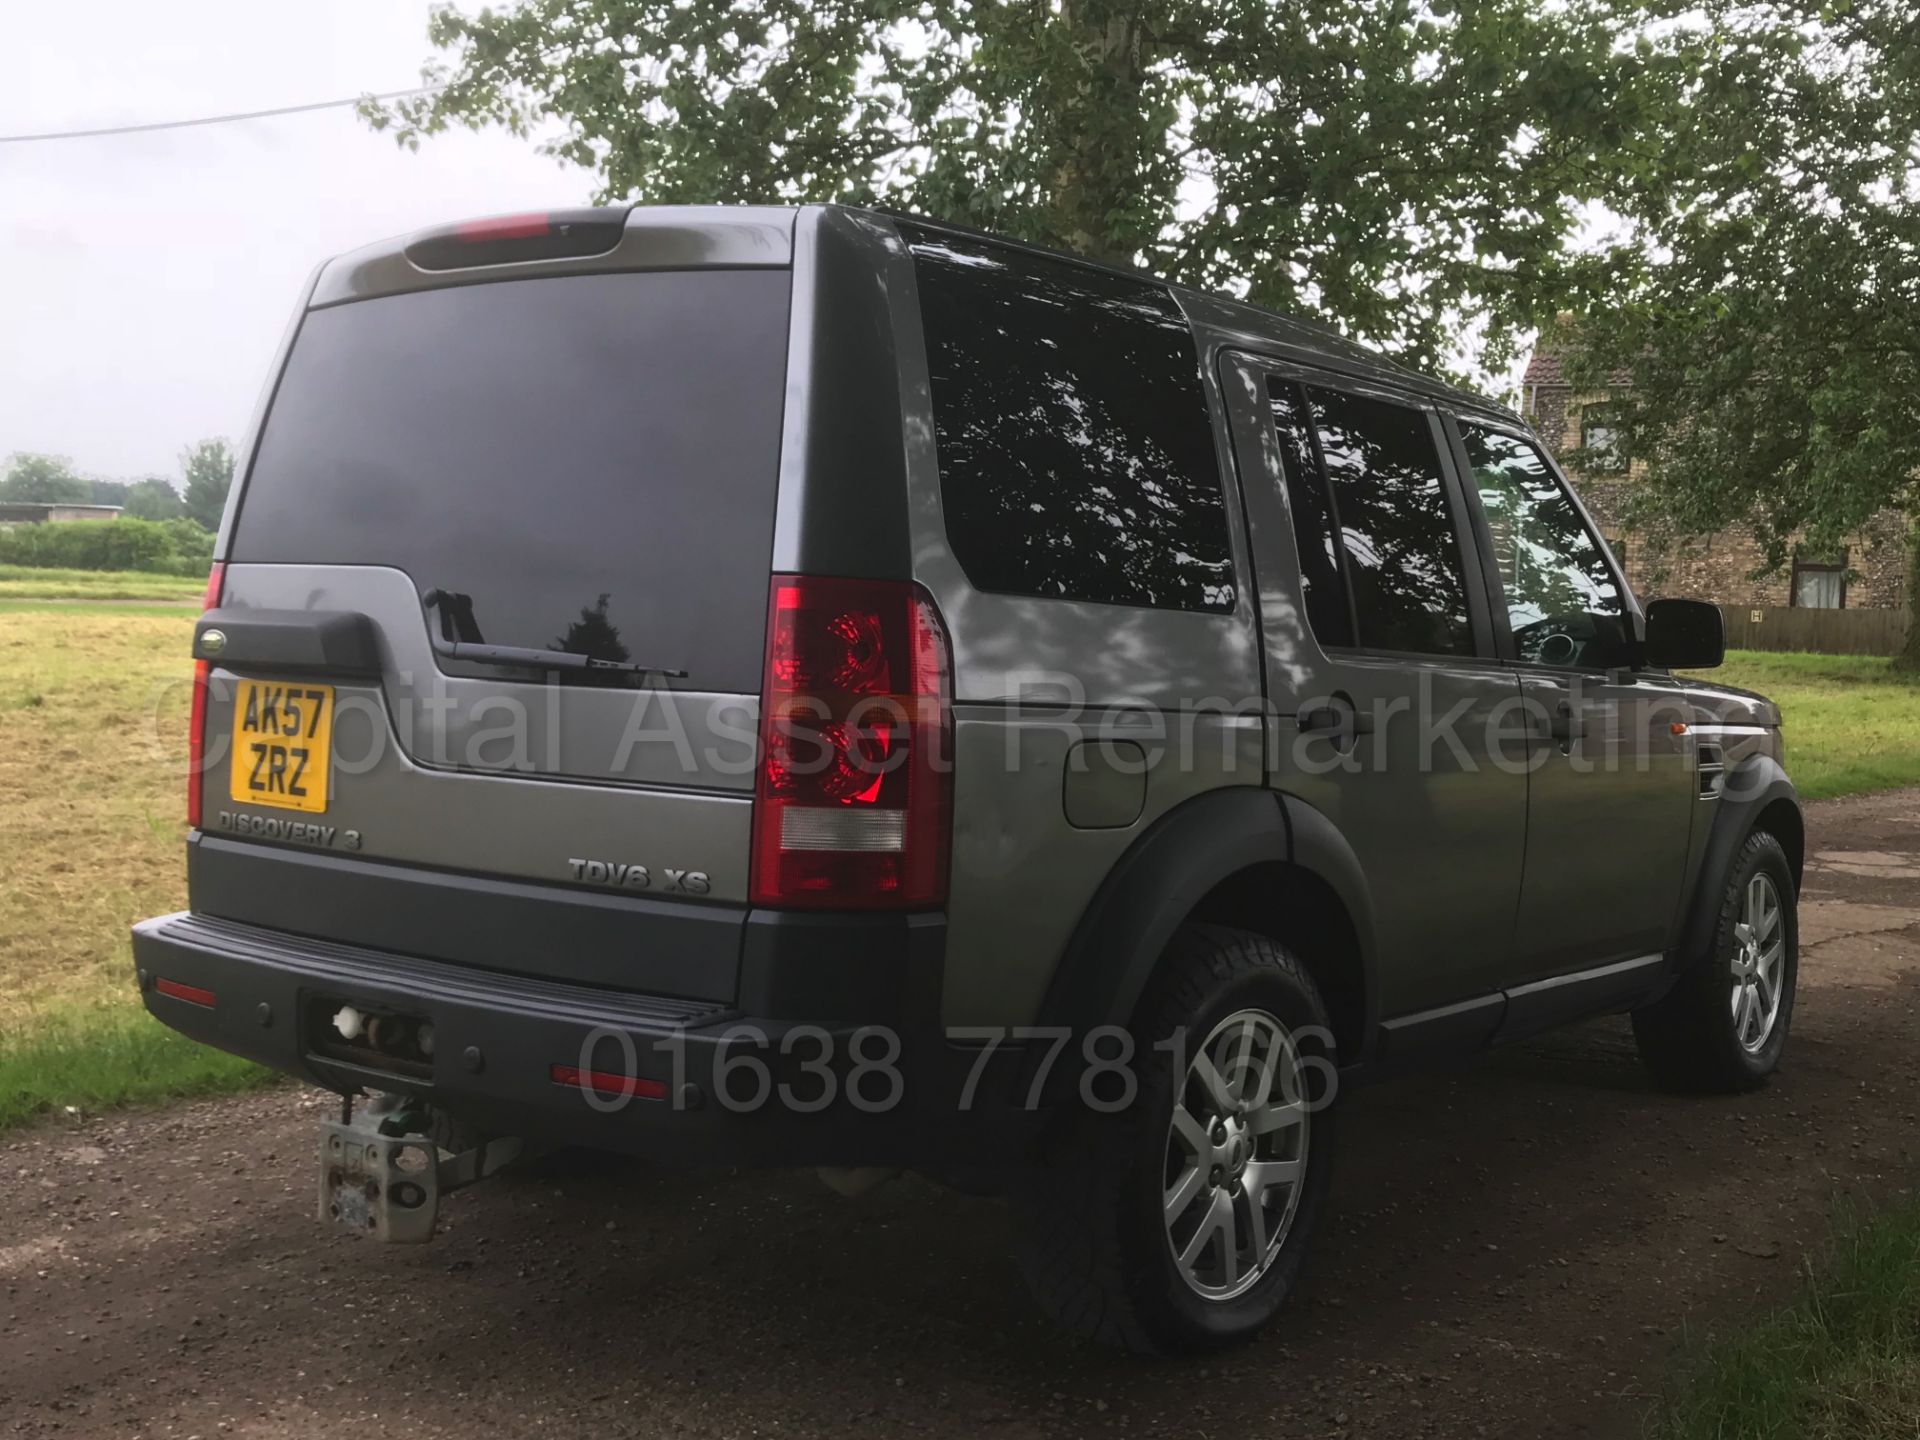 (On Sale) LAND ROVER DISCOVERY 3 'XS EDITION' **COMMERCIAL VAN**(2008 MODEL) 'TDV6-190 BHP' (NO VAT) - Image 10 of 38